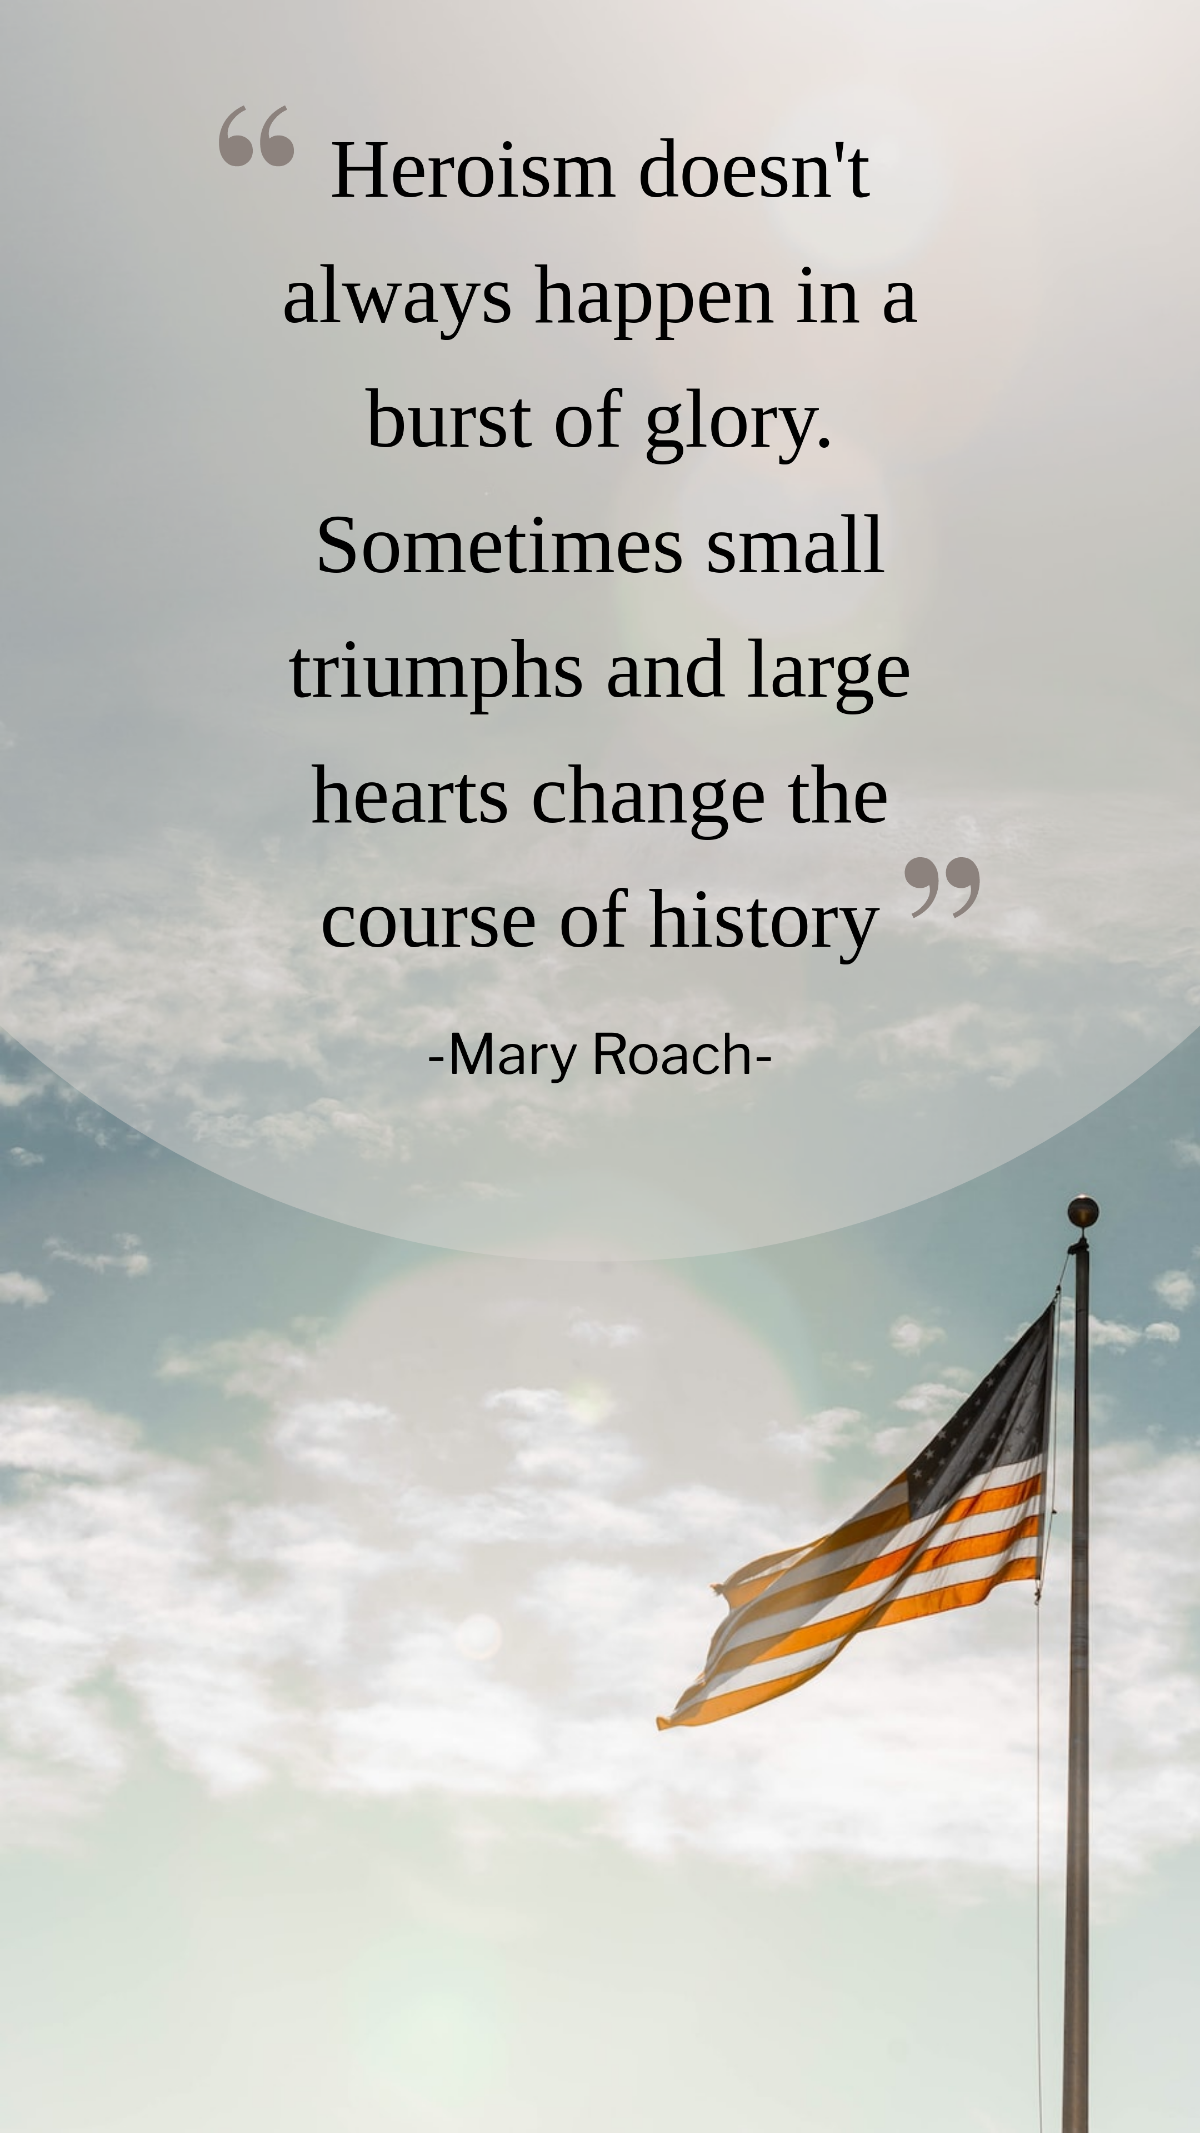 Mary Roach - Heroism doesn't always happen in a burst of glory. Sometimes small triumphs and large hearts change the course of history